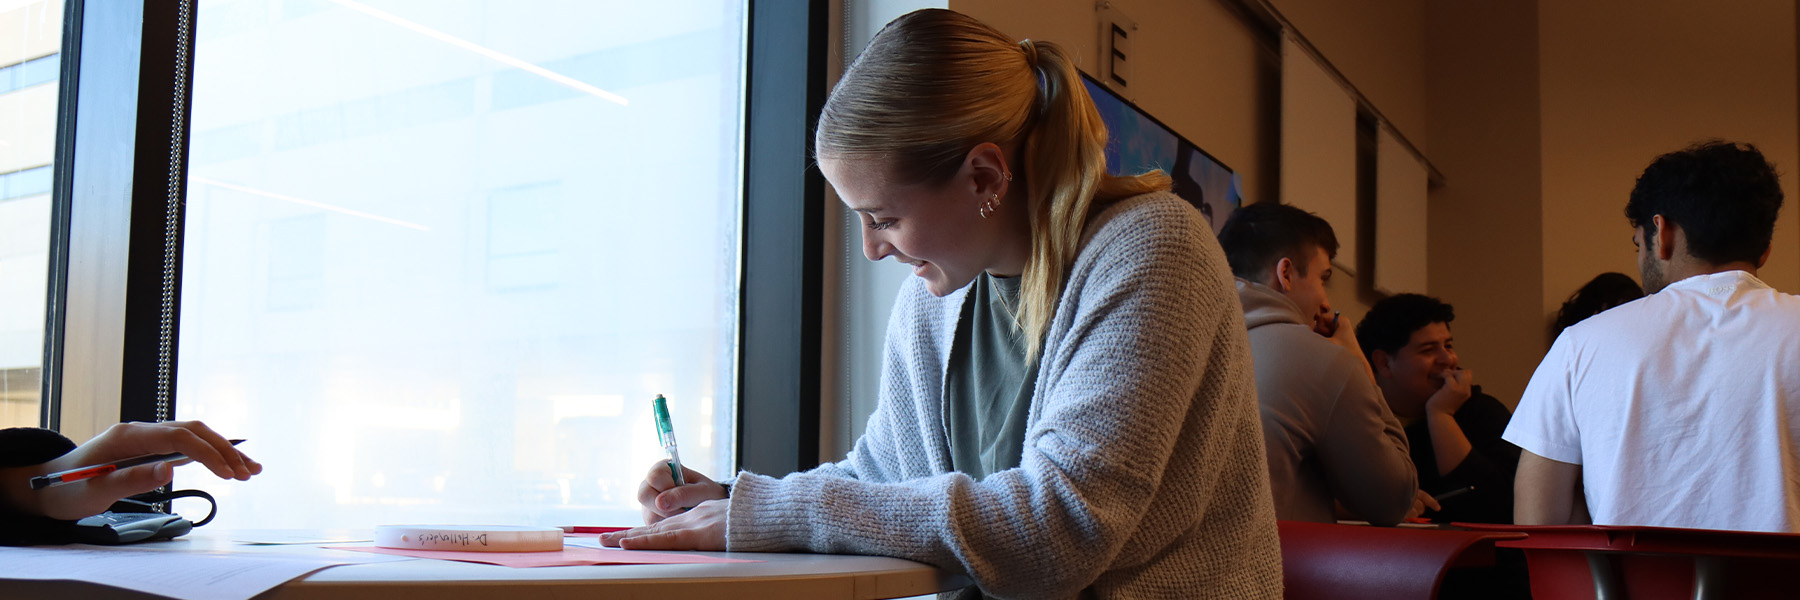 A female student writing on a piece of paper at a desk near a bright window; students at another table are seen in the background